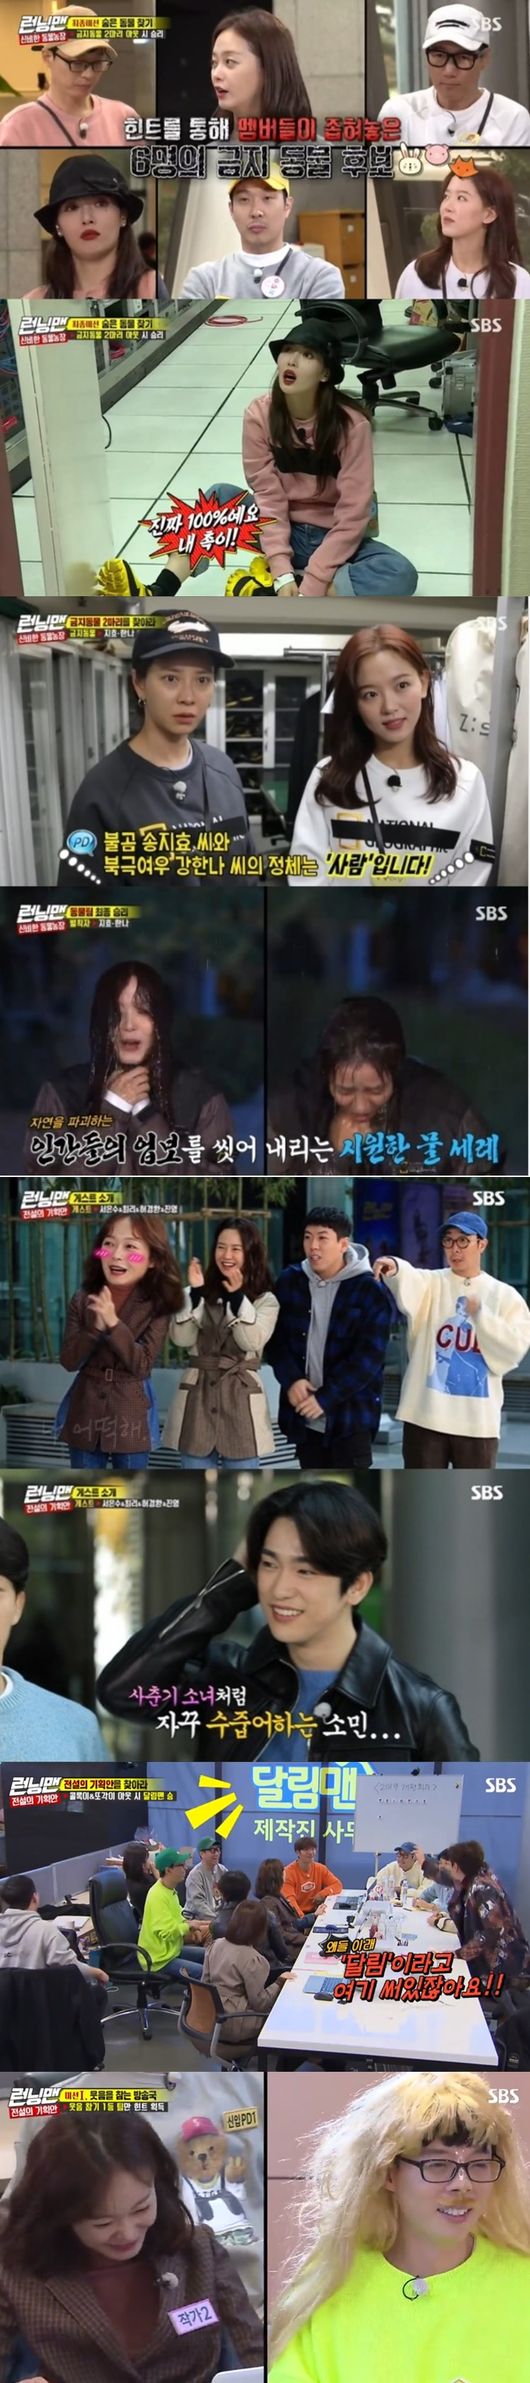 SBS Running Man rise is not unusualSBS Running Man is jumping to 10% of Per minute top TV viewer ratings and TV viewer ratings are on the rise.According to Nielsen Korea, a TV viewer rating research institute, Running Man, which was broadcast on the 17th, showed an increase in TV viewer ratings for the sixth consecutive week with an average TV viewer ratings of 5.4% and 2.3%.The 2049 target TV viewer ratings, which are important indicators of major advertising officials, rose by 4.8% (based on the second part of the Seoul metropolitan areas TV viewer ratings), not only to overtake the Masked Wang and the Donkey Ears, but also 1% more than last week.Per minute The best TV viewer ratings shot a whopping 10 percent.The broadcast was decorated with the final race of Mysterious Animal Farm and began to search for banned animals.If you find a forbidden animal and in-N-Out Burger, the general animal wins, but the forbidden animal was able to use the At Close Range.When an In-N-Out Burgered animal is created by a prohibited animal, the At Close Range is created, and all hints in the At Close Range disappear, and the In-N-Out Burger is also made even if the animal is inside it.Yoo Jae-Suks performance shone in the face of everyone questioning each other.Yoo Jae-Suk found out that the forbidden animals were people, and he noticed that Kang Han-Na and Song Ji-hyo were sisters and bears who became foxes respectively.In the meantime, Kang Han-Na and Song Ji-hyo respectively targeted Hyun-ah and Everglow Shihyeon in-N-Out Burger and Yoo Jae-Suk.Yoo Jae-Suk informed members of the identity of the banned animals in an urgent situation and eventually the banned animals Kang Han-Na and Song Ji-hyo were in-N-Out Burger and received the final penalty.On the other hand, on the same day, the Legendary Plan Race, which was guested by God Seven Jinyoung, actor Seo Eun-soo, Choi Ri and comedian Hur Kyung-hwan, was also released.Jeon So-min welcomed Jinyoung by revealing his excitement, but he gave a big smile with unexpected sweat.Since then, members have been divided into PD, writers, and new PD teams of the Ralim Man program and have begun to search for Kolok Lee and the other, which is reported as a ghost story of the broadcaster.The first mission was to hold laughter. You have to put up with laughter under any circumstances, and if you laugh, you have to carry out a dressing penalty.In the midst of a fierce laughter confrontation, a questionable tool uncle appeared in front of the members.Everyone was nervous about the powerful laugh alarm and this scene took the best one minute with 10% of Per minute top TV viewer ratings.Next weeks broadcast will show the identity of Kolocki and the other